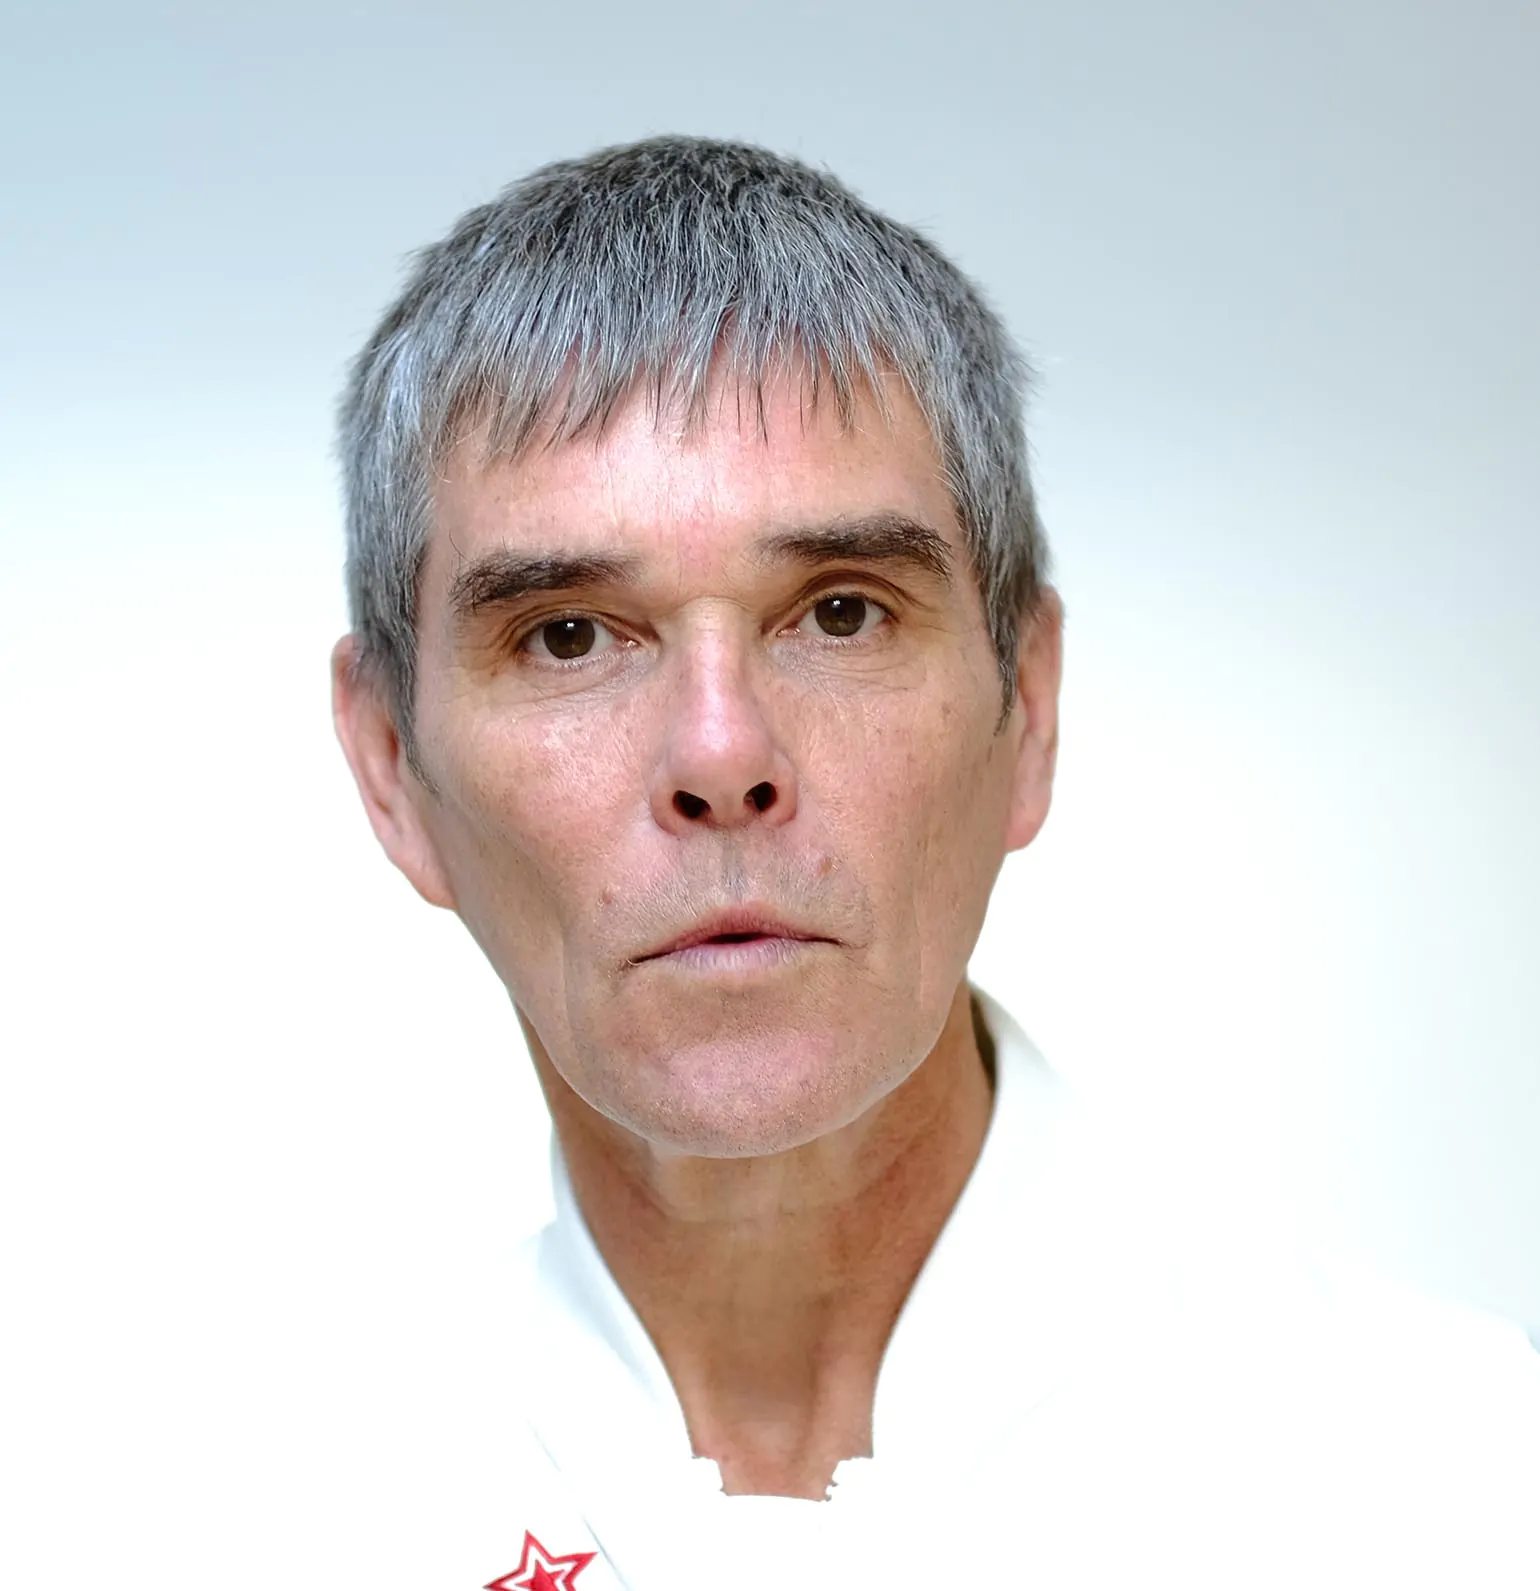 IAN BROWN shares new track ‘Little Seed, Big Tree’ about the Covid-19 pandemic – Listen Now